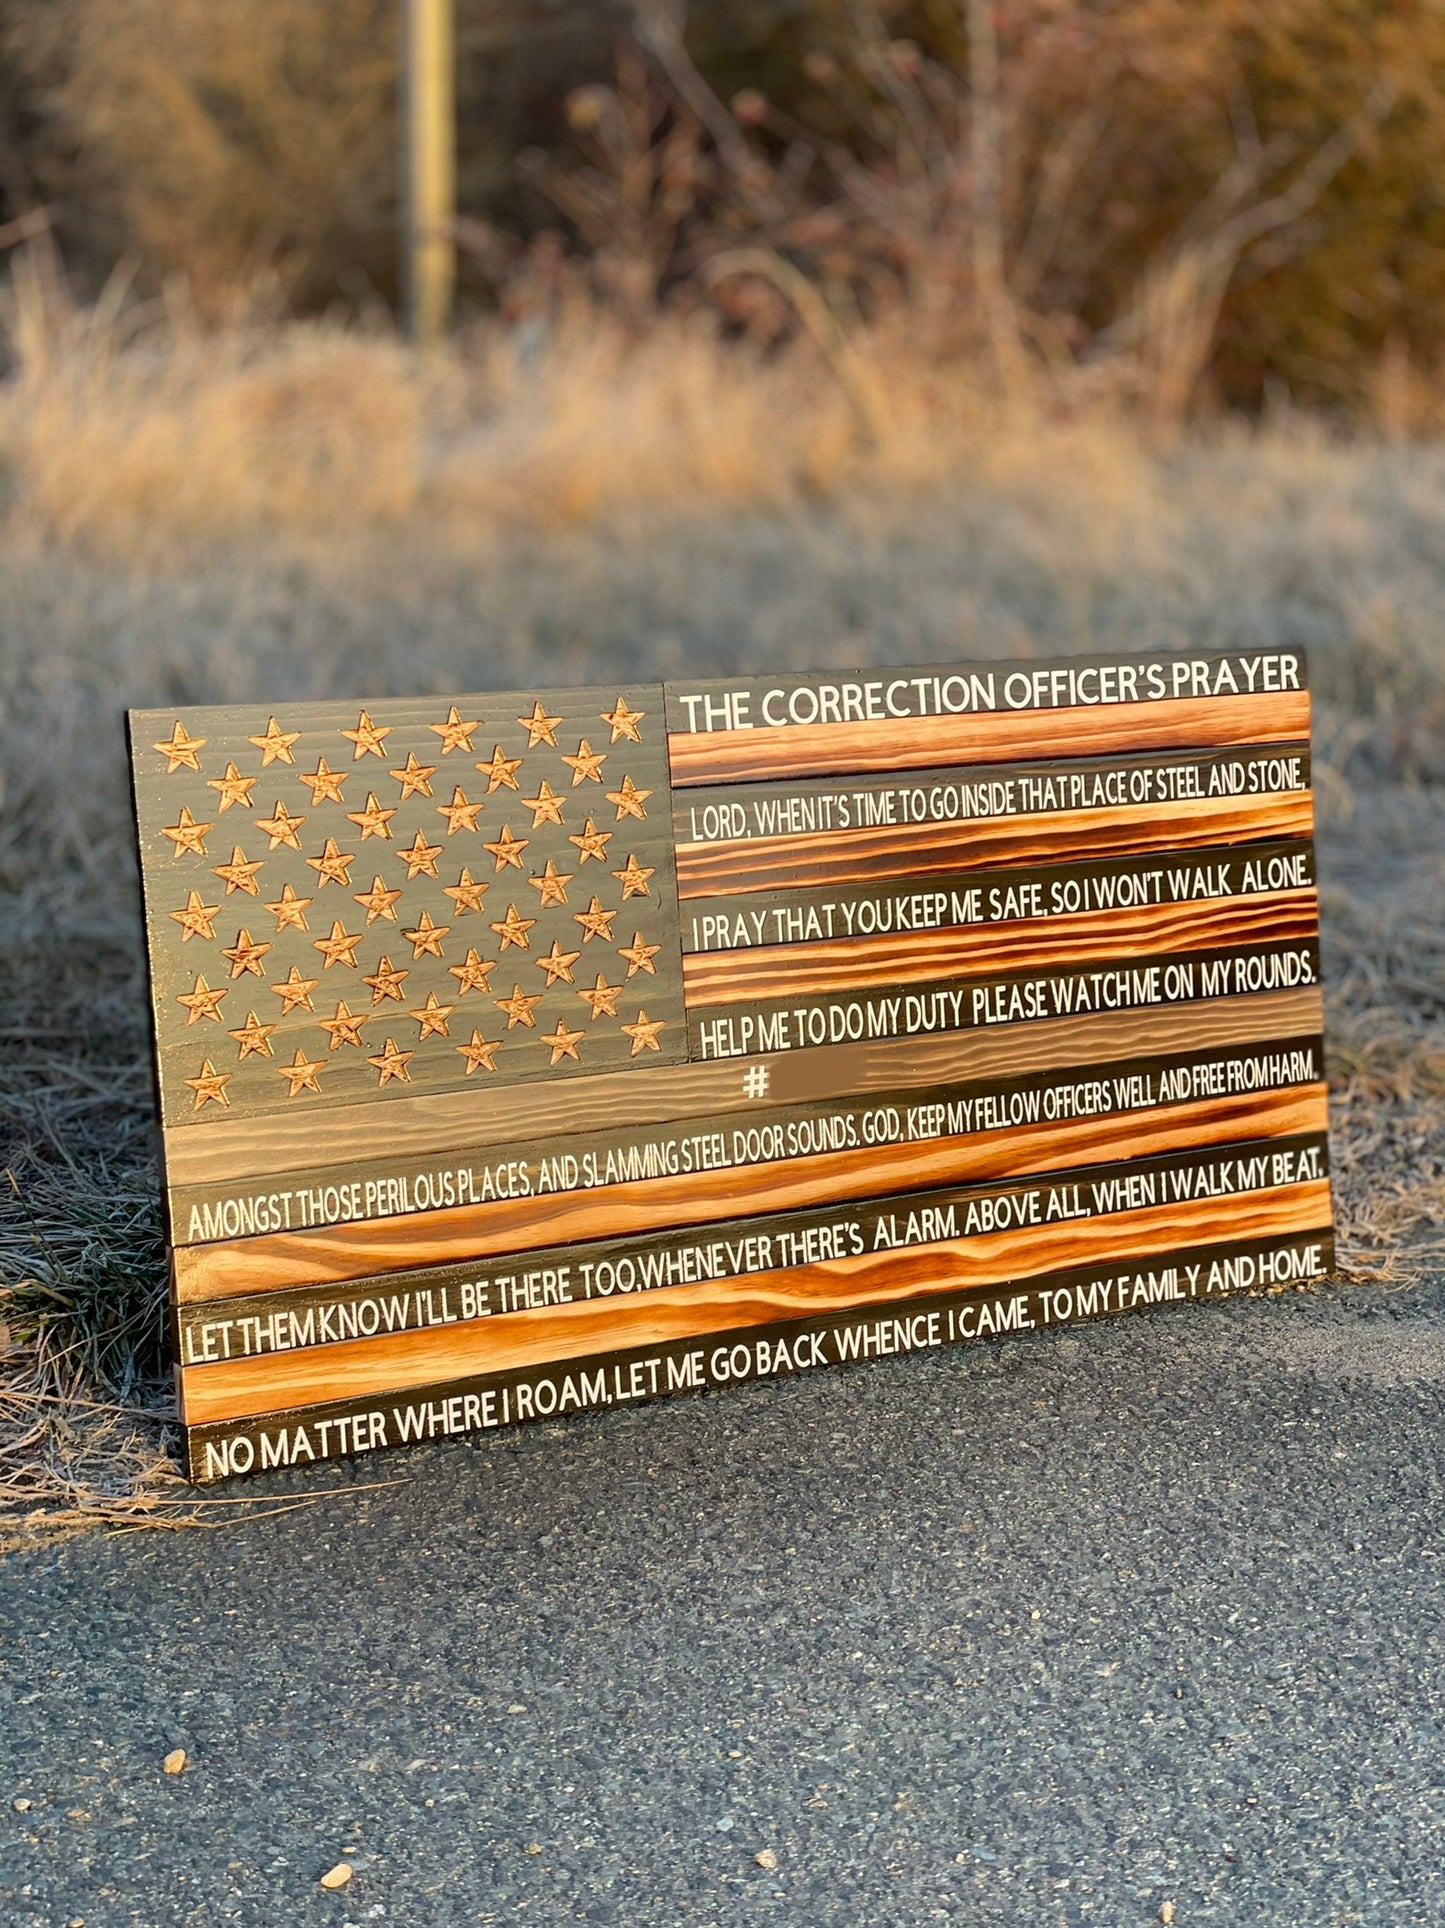 Thin Line American Wooden Flag